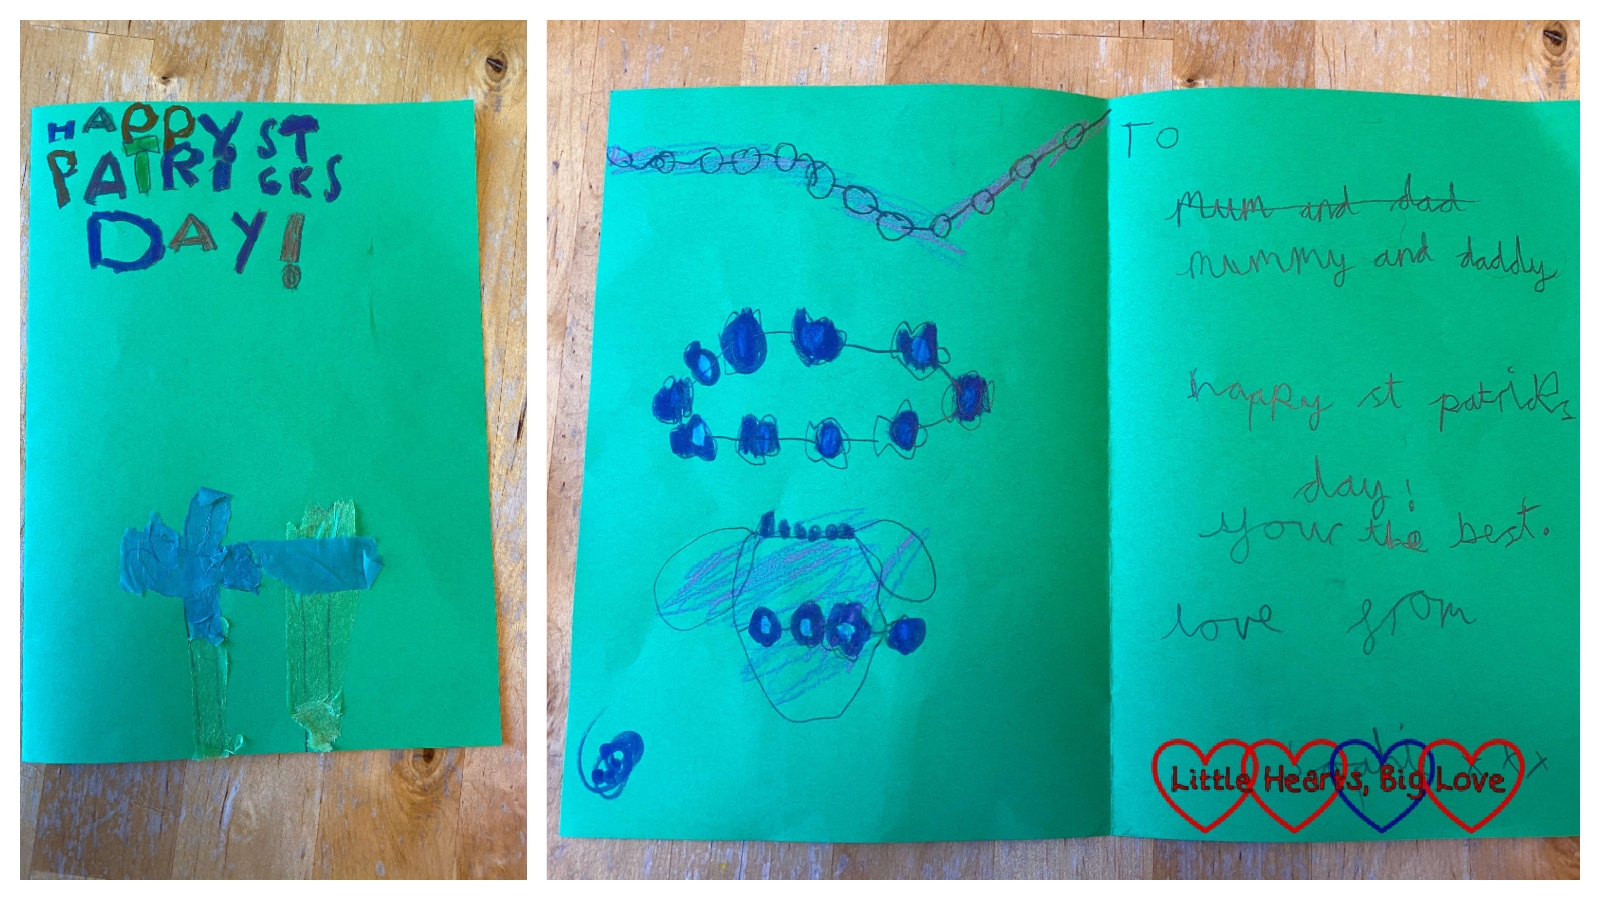 The St Patrick's Day card Sophie made for us